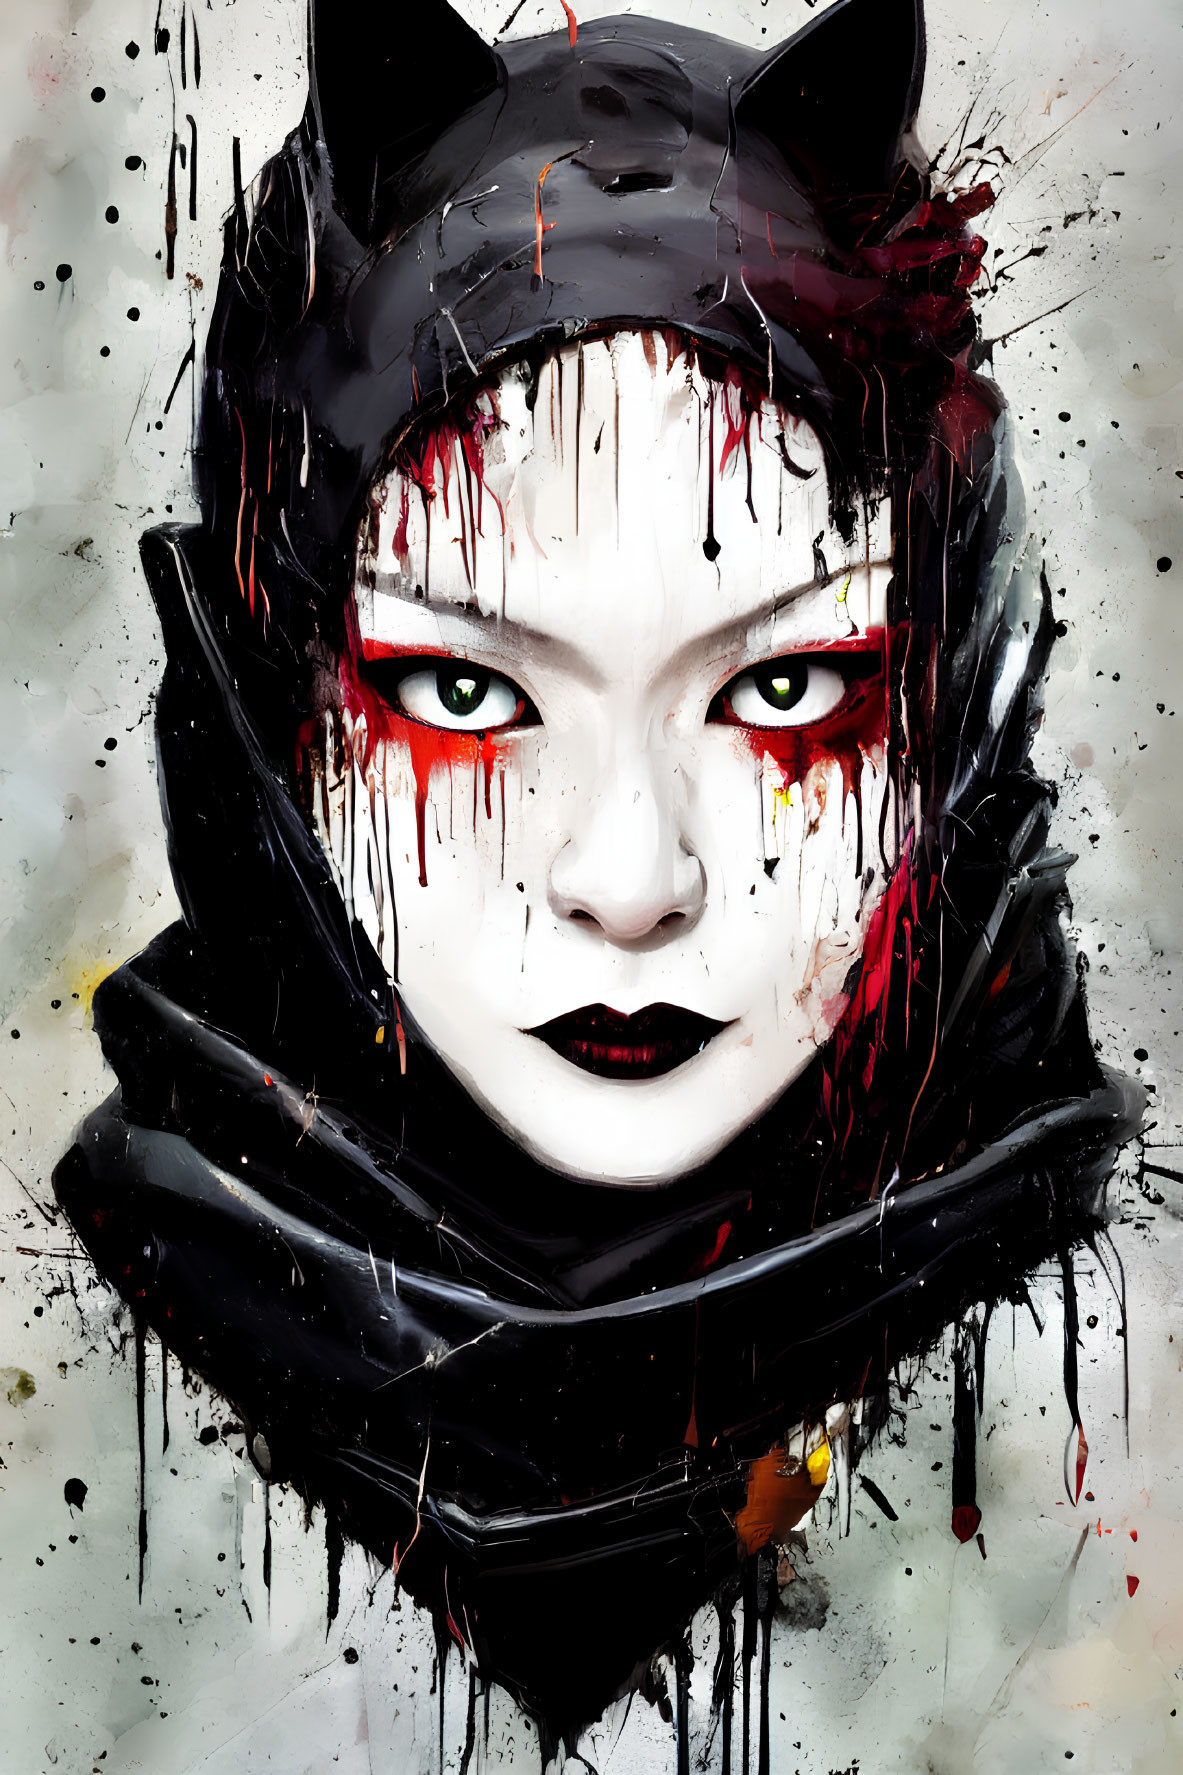 Stylized portrait of person with feline-themed hood and dramatic makeup